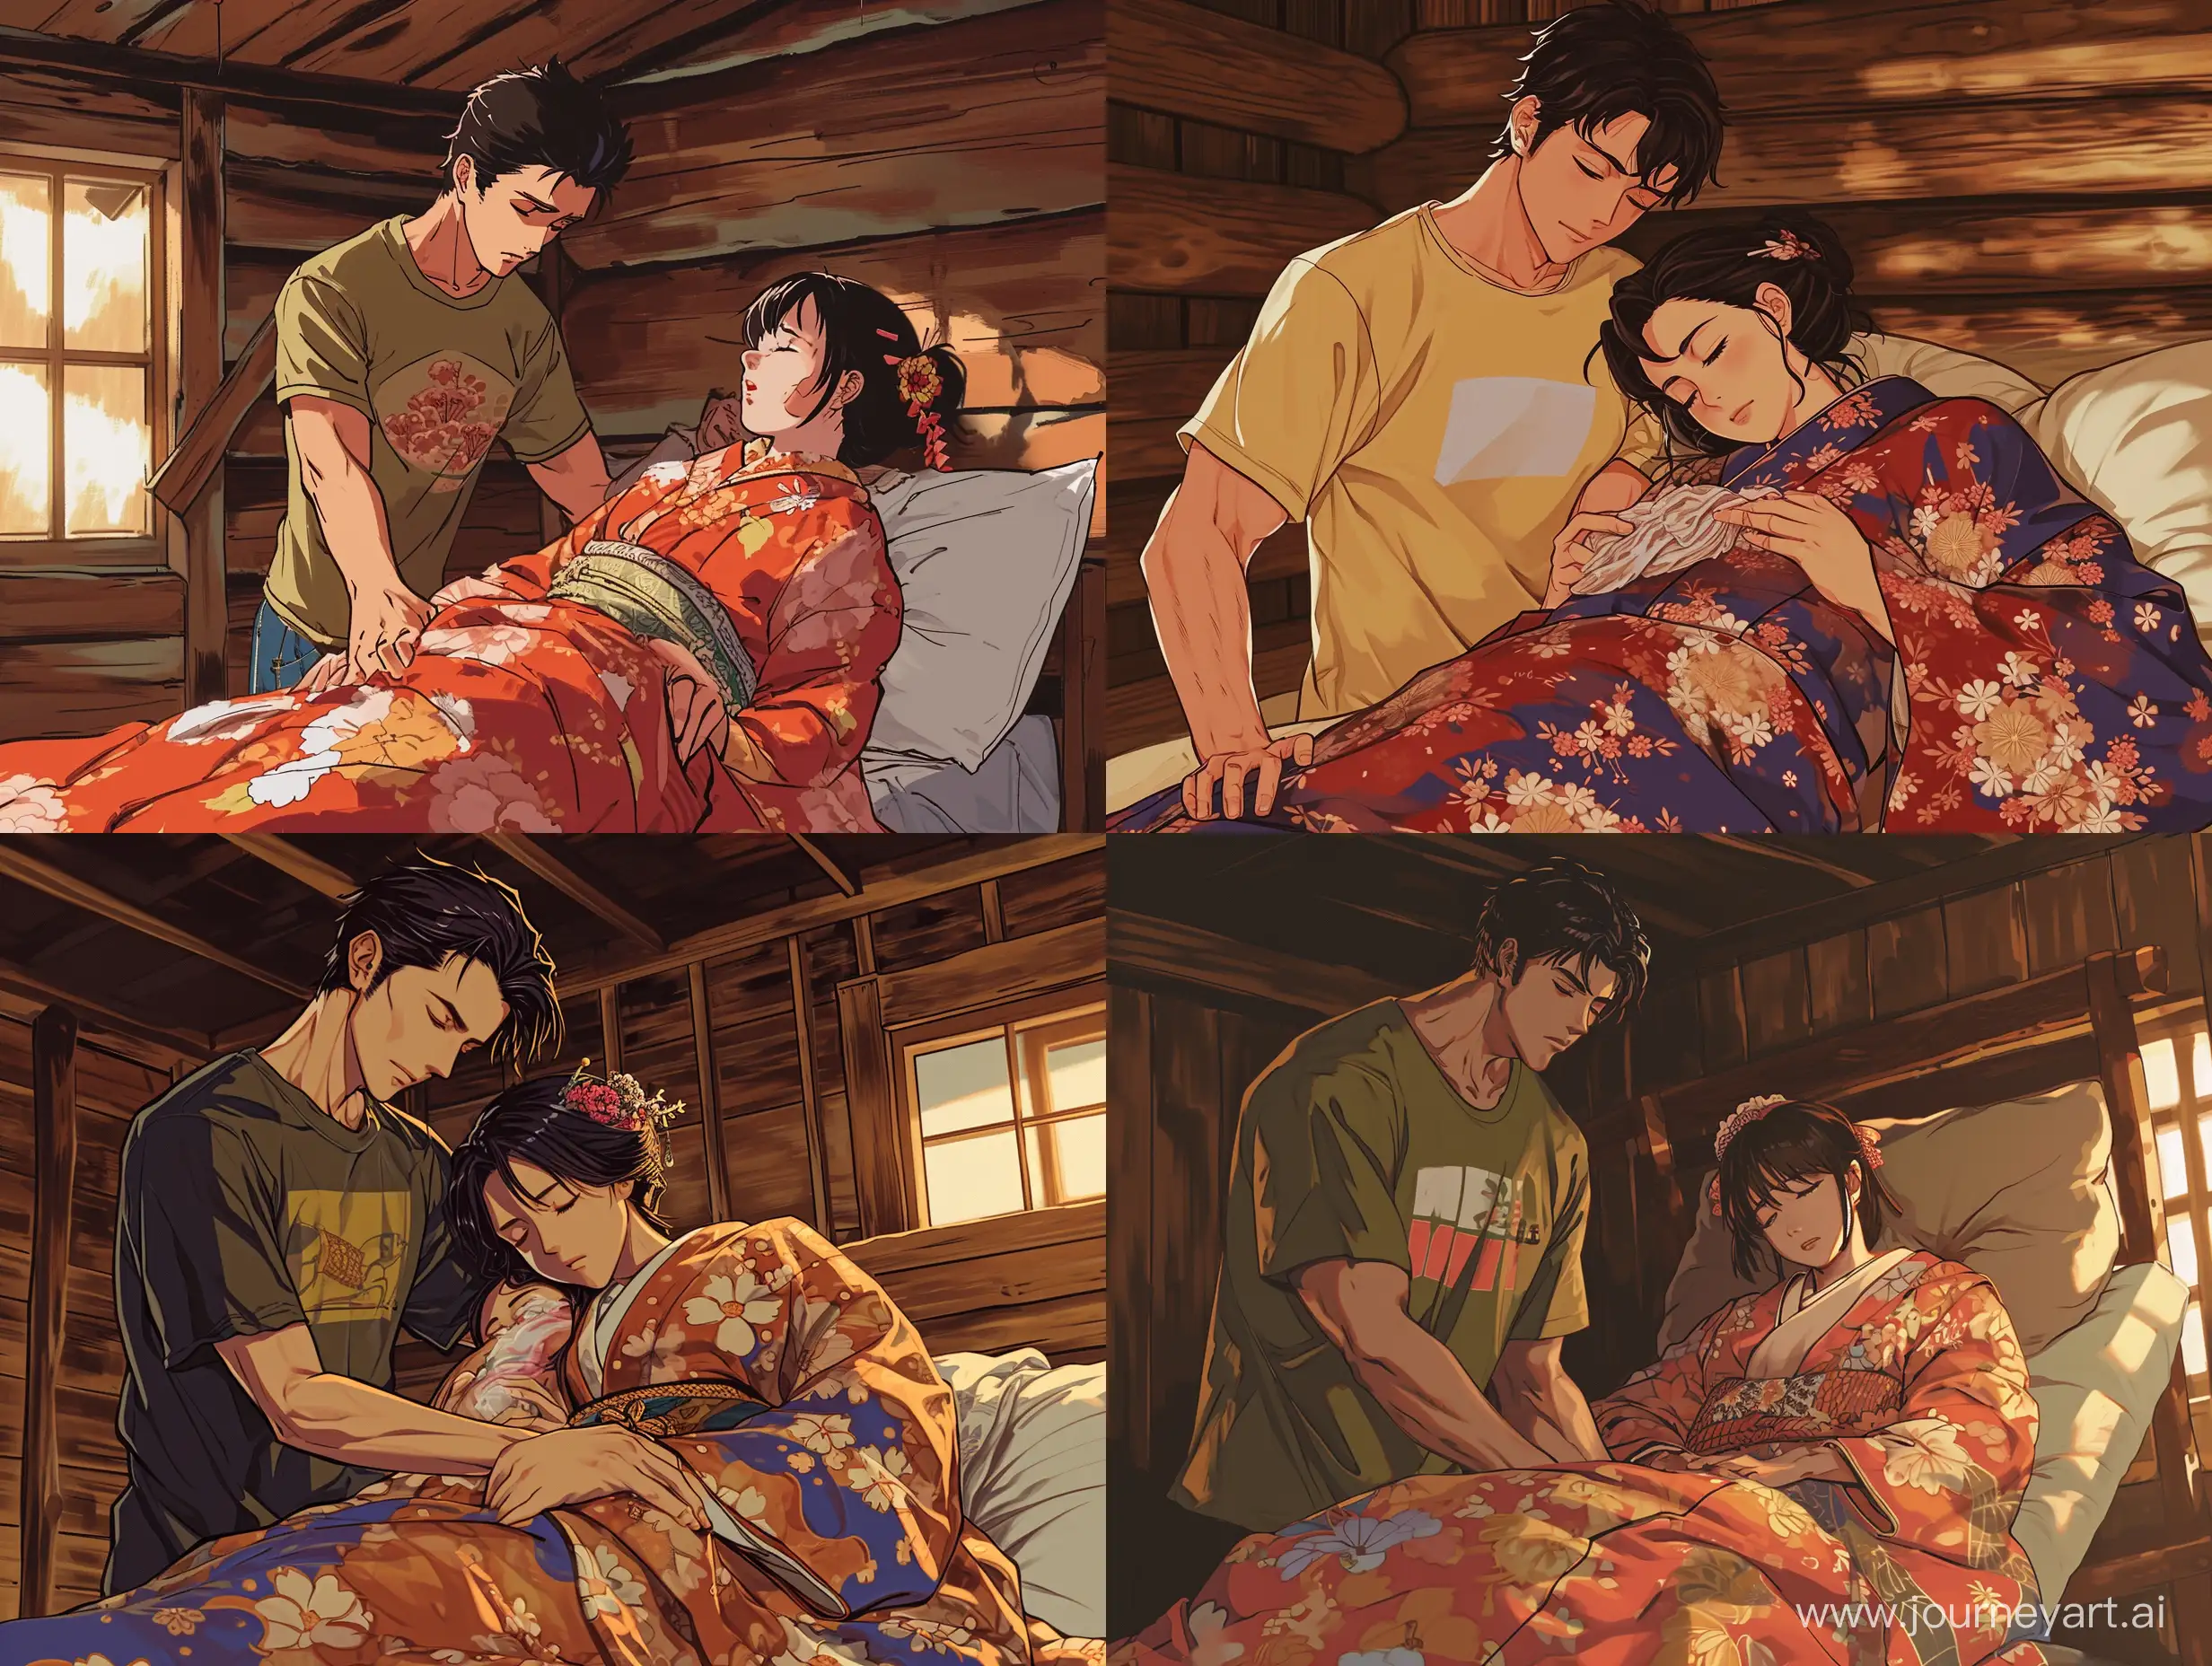 Caring-Anime-Scene-Thoughtful-Man-Attending-to-Ill-Woman-in-Kimono-in-Cozy-Wooden-Cabin